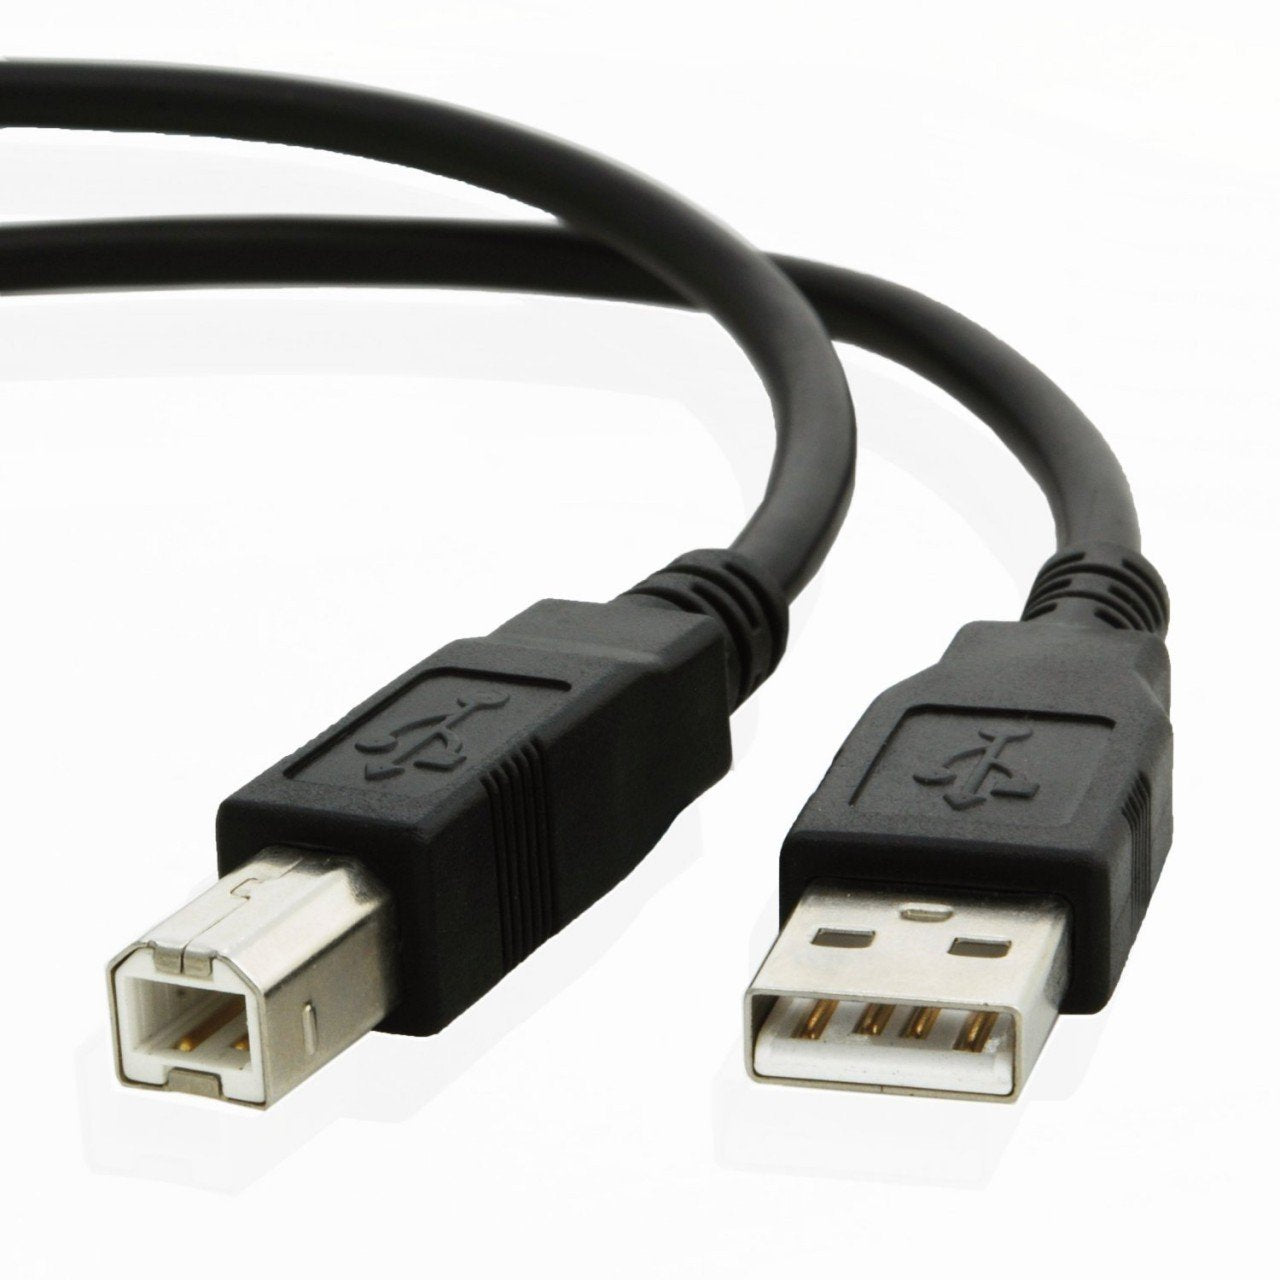 USB cable for Epson BRIGHTLINK PRO 1420WI